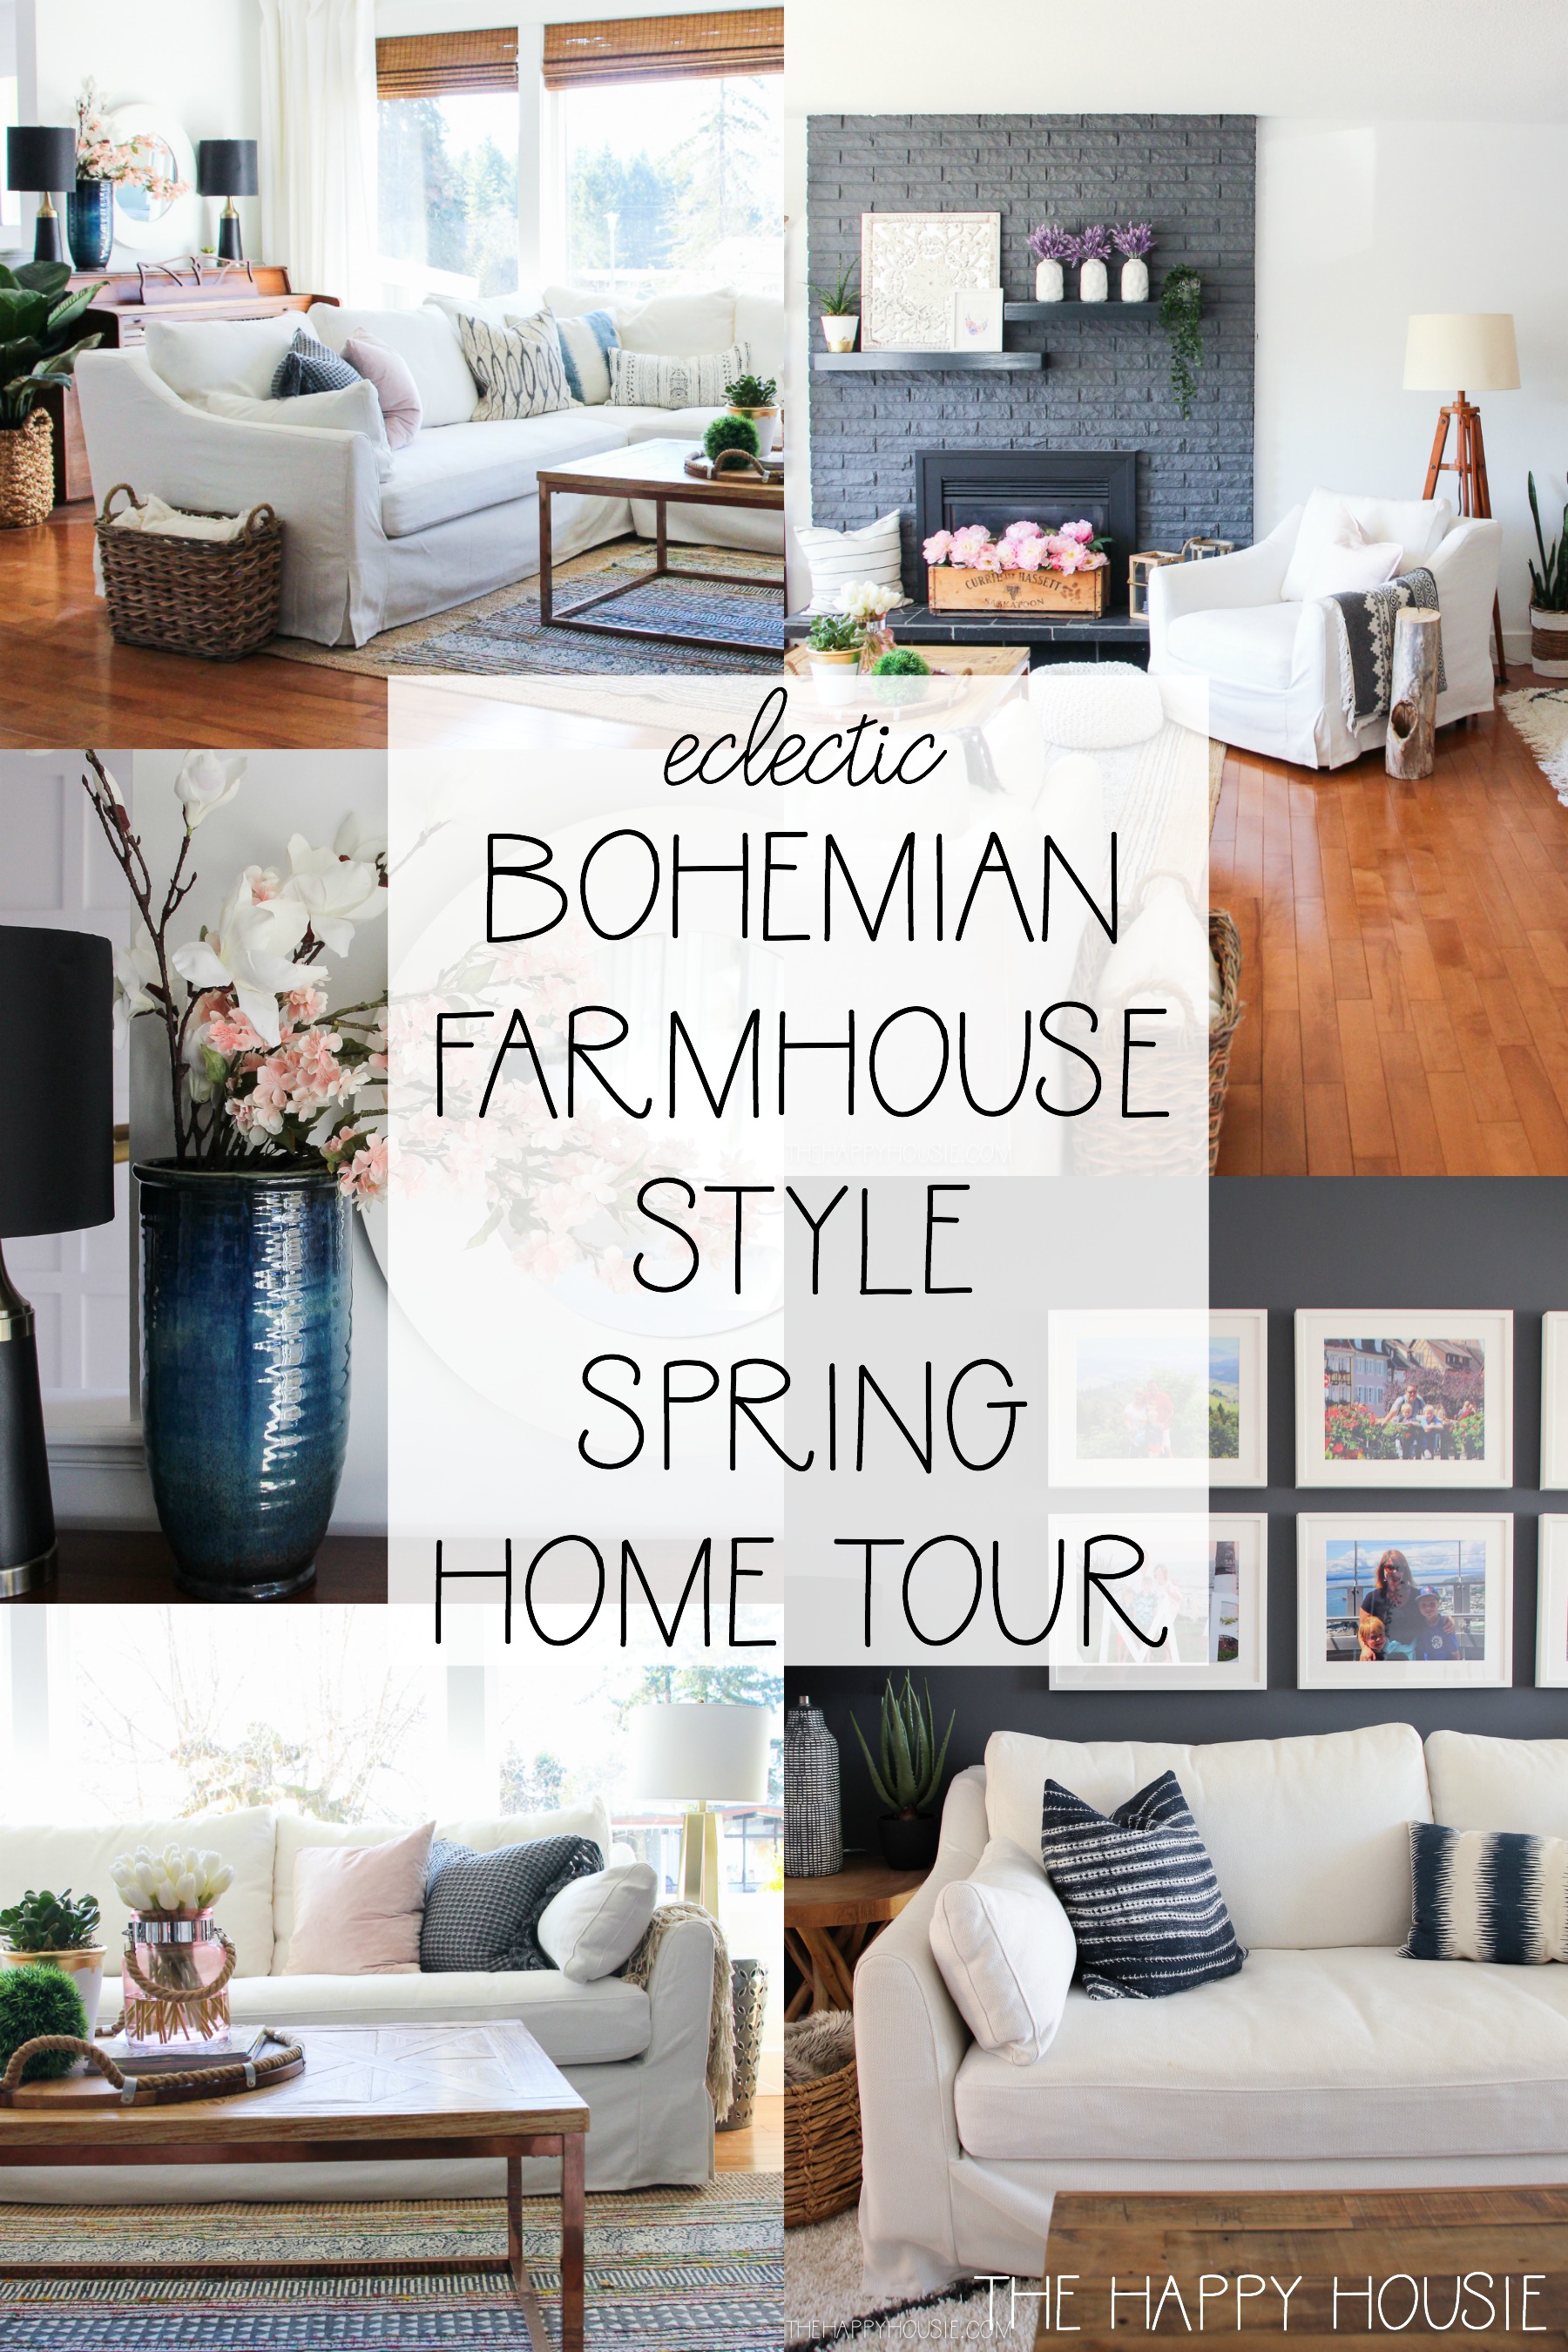 Eclectic Bohemian Farmhouse Style Spring Home Tour poster.